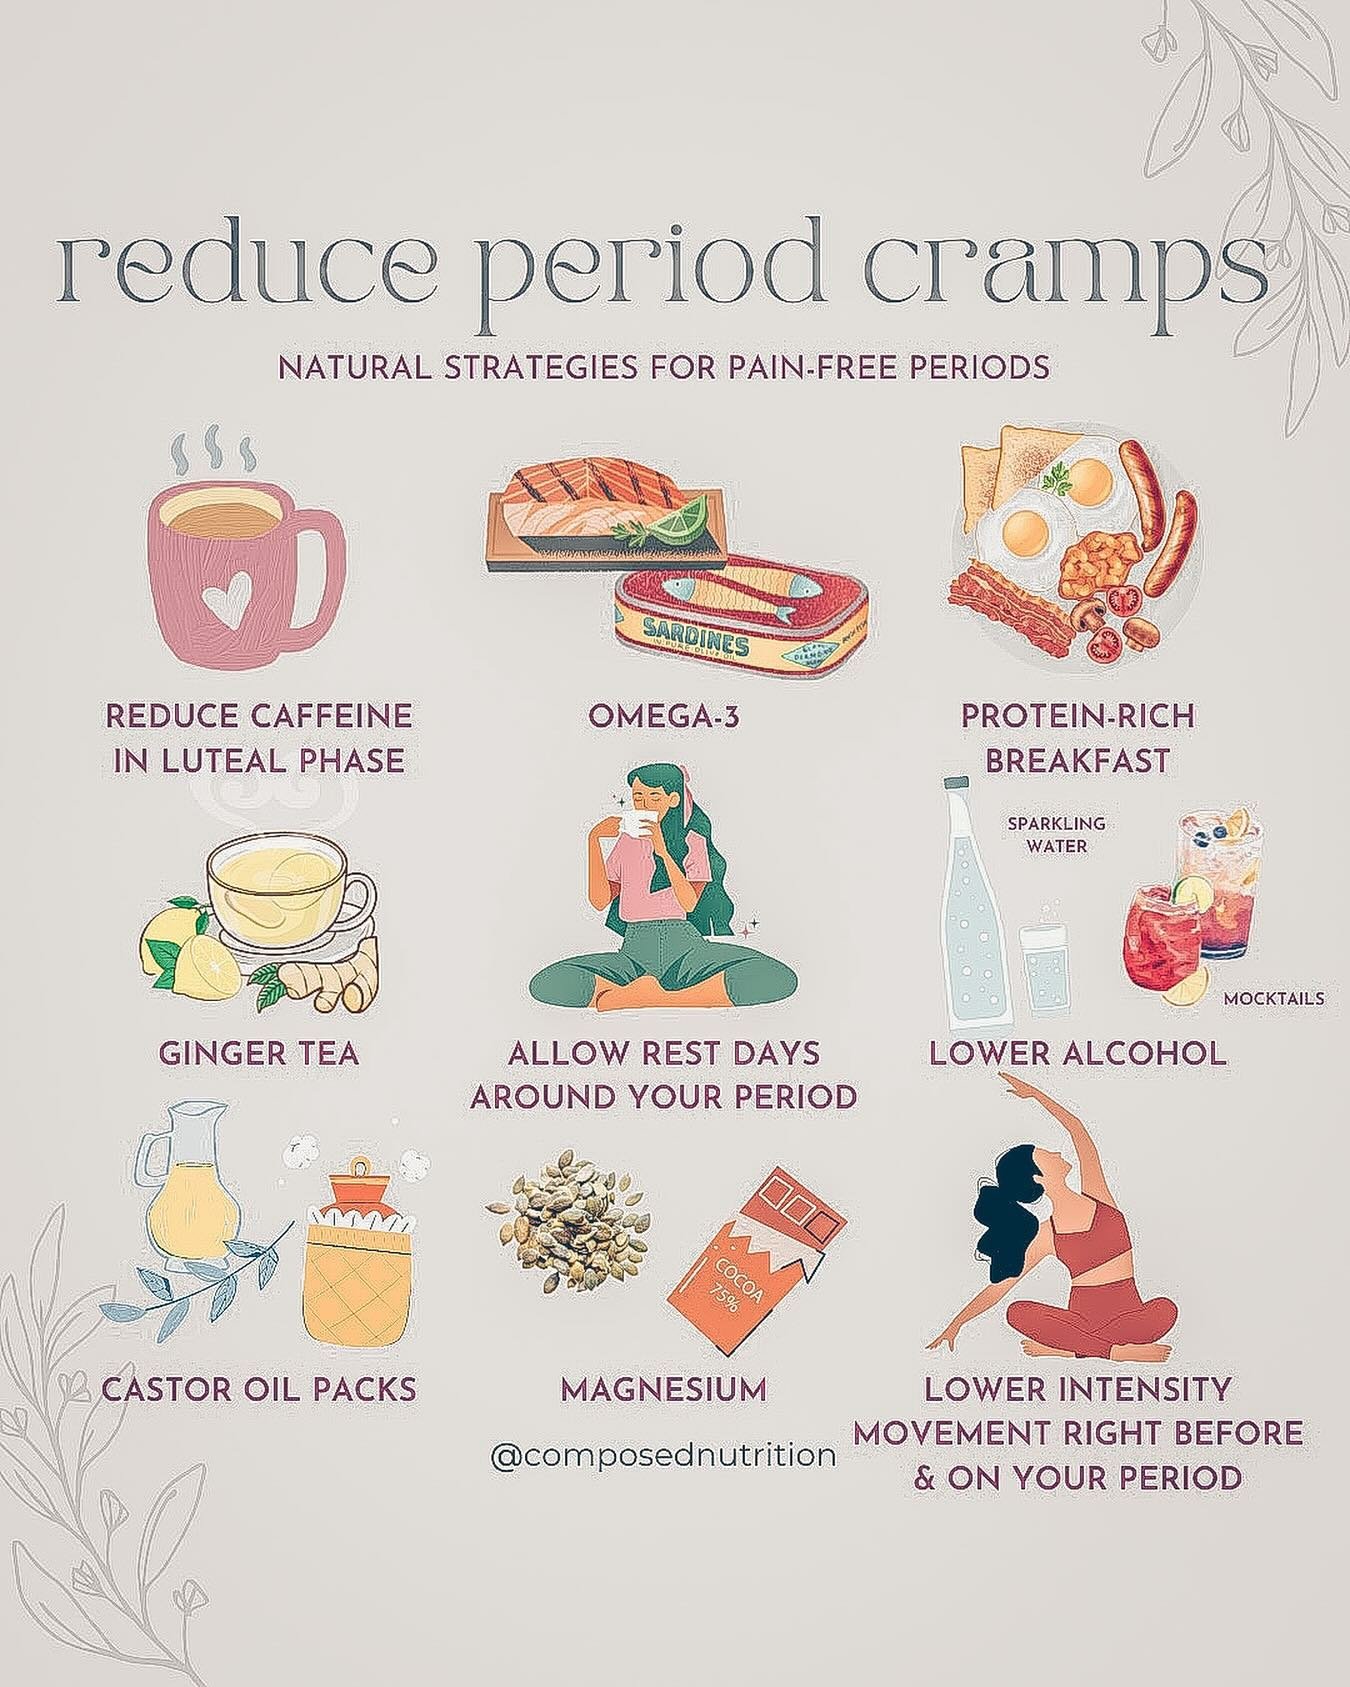 REDUCE PERIOD CRAMPS⚡️

Pain is a common period symptom that can show up in the luteal or menstrual phases (other phases too but these are the most common):
⚡️Cramps
⚡️Breast pain
⚡️Inflamed skin
⚡️Back pain
⚡️Headaches

Last time I polled asking how